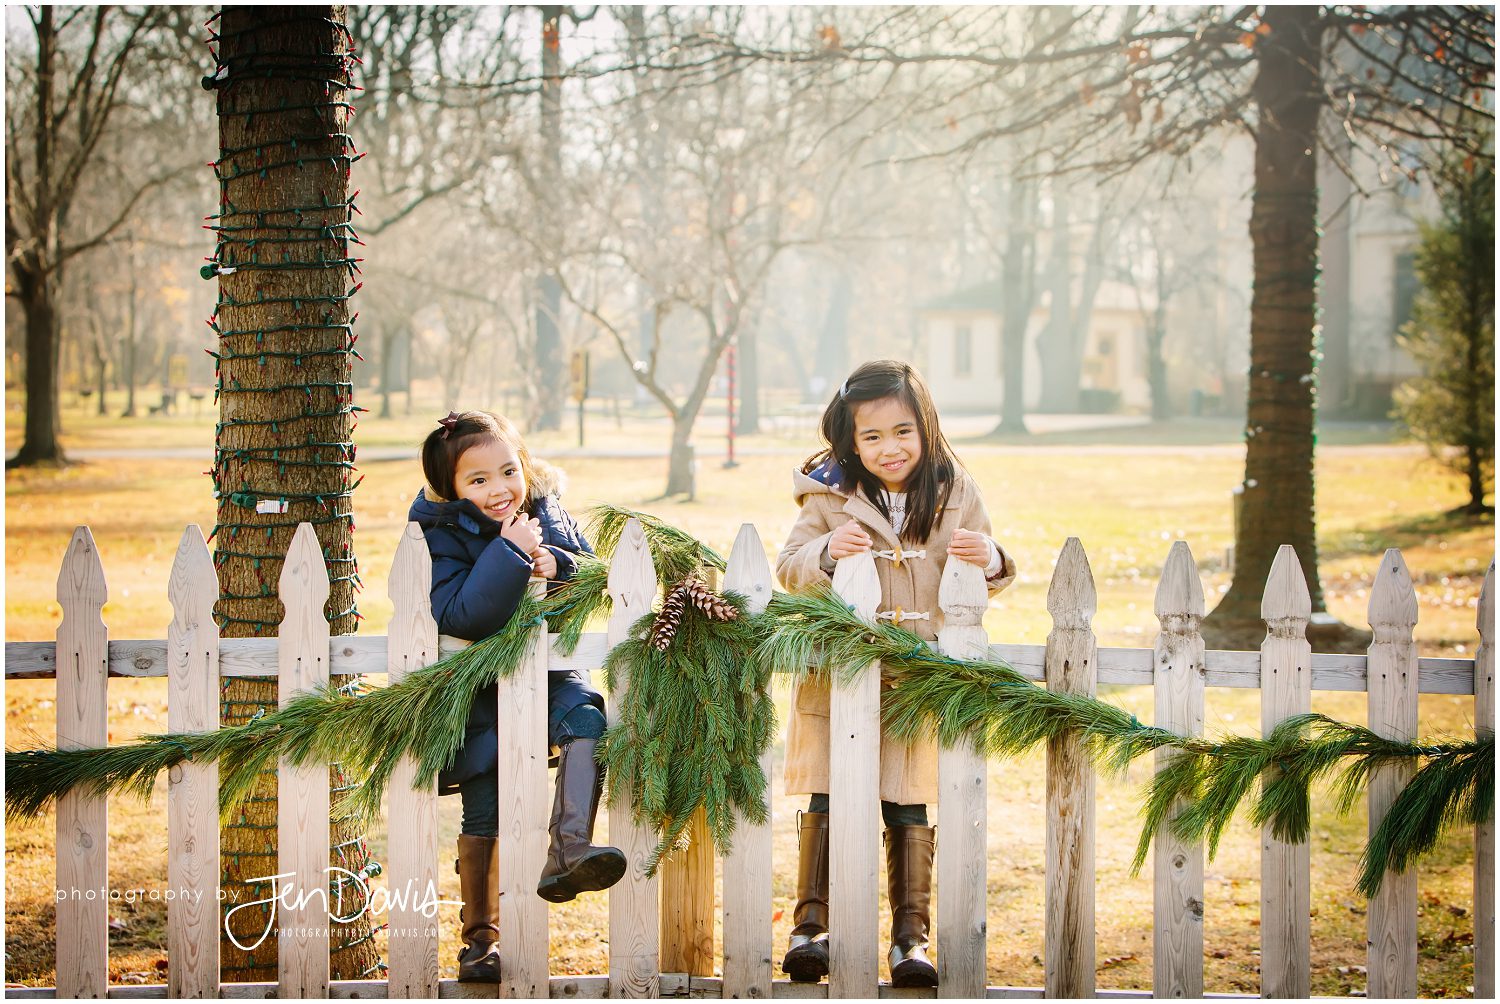 Family standing by fence with garland